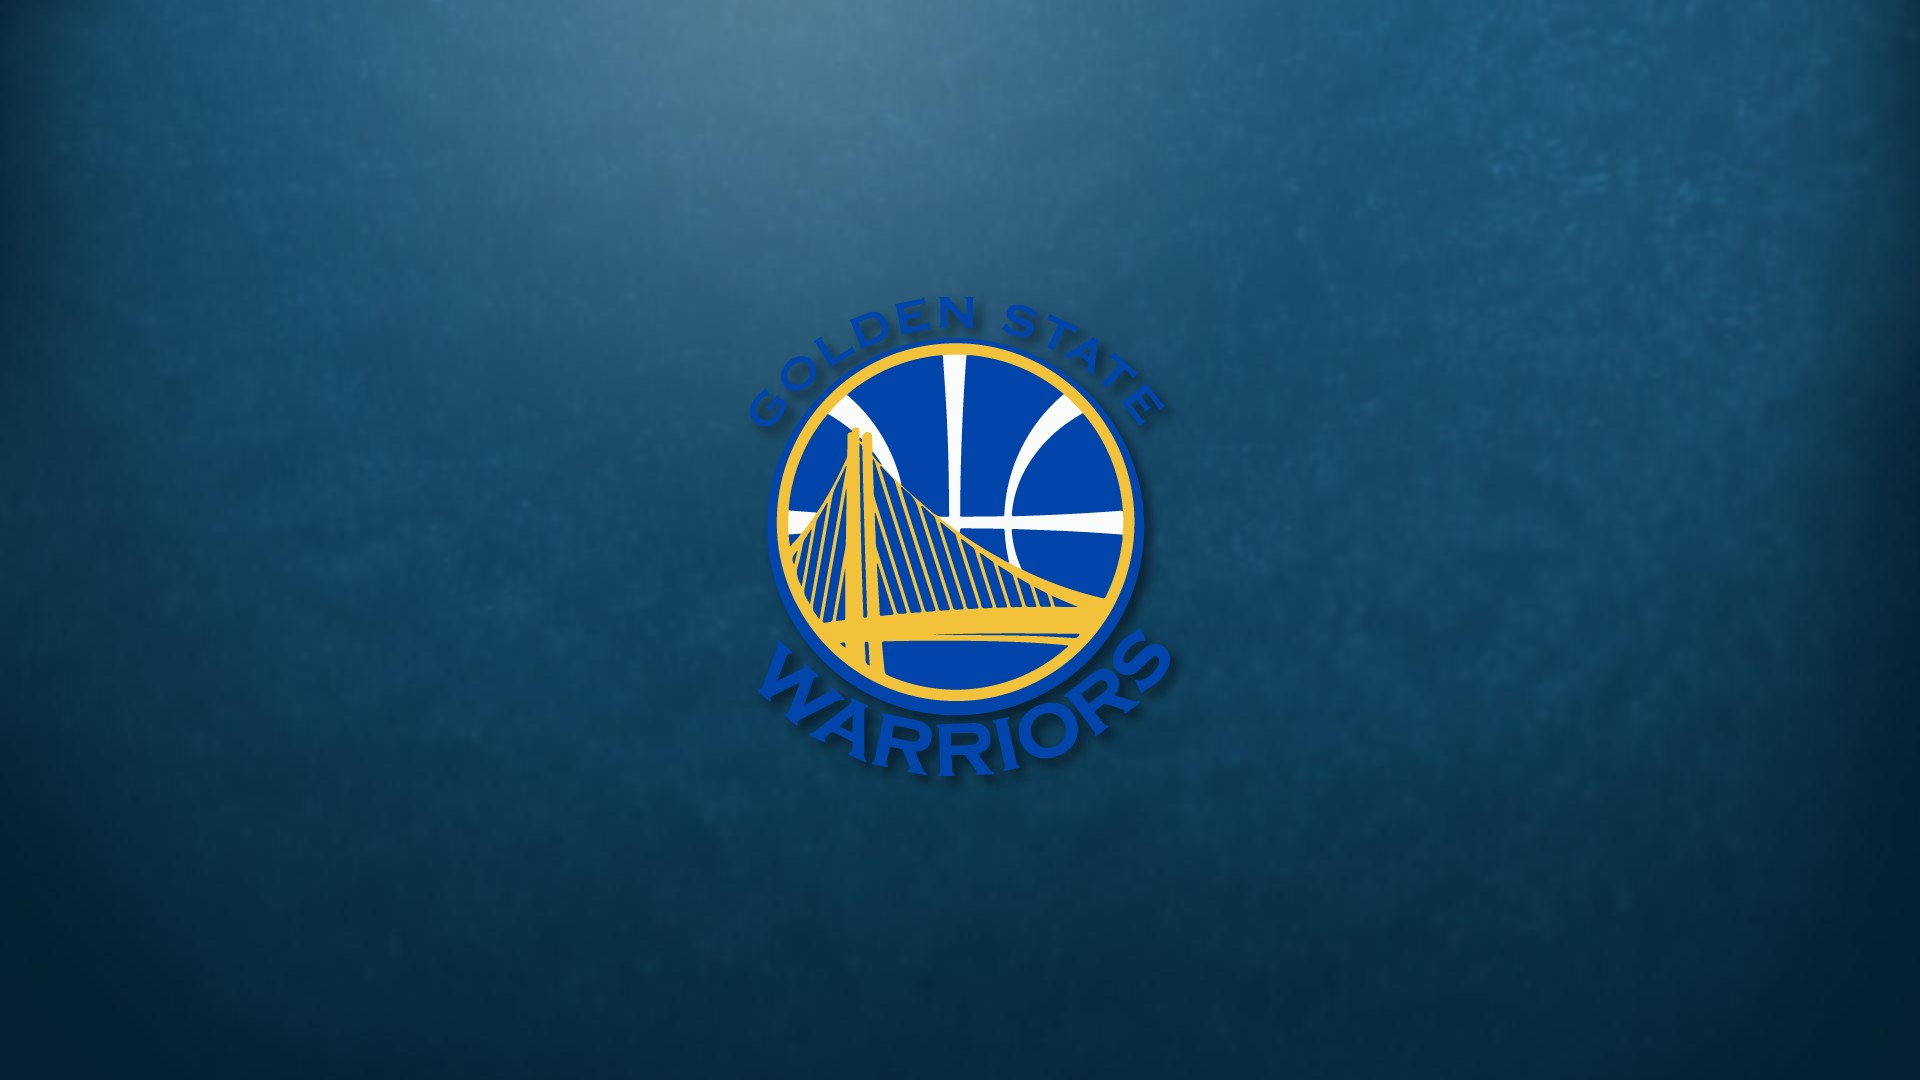 Desktop Wallpaper Golden State Warriors with resolution 1920X1080 pixel. You can use this wallpaper as background for your desktop Computer Screensavers, Android or iPhone smartphones